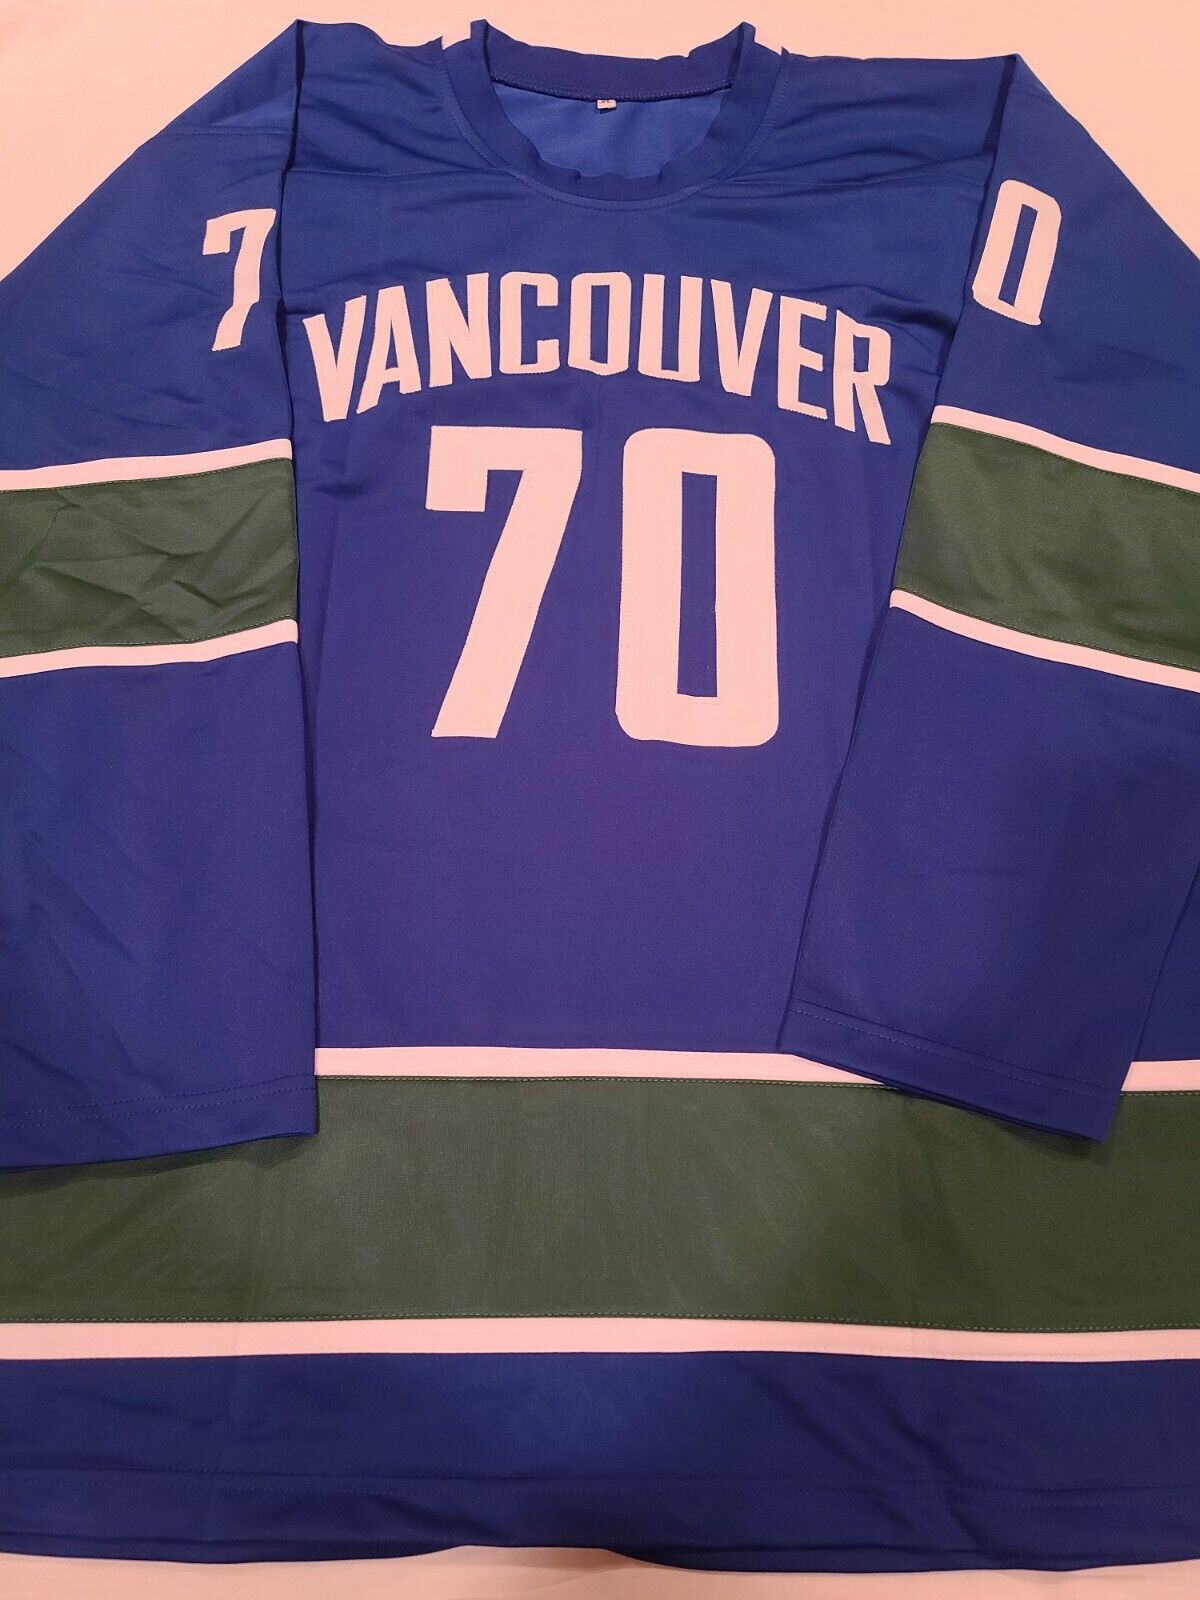 Tanner Pearson (#70) signed special edition Vancouver Canucks jersey